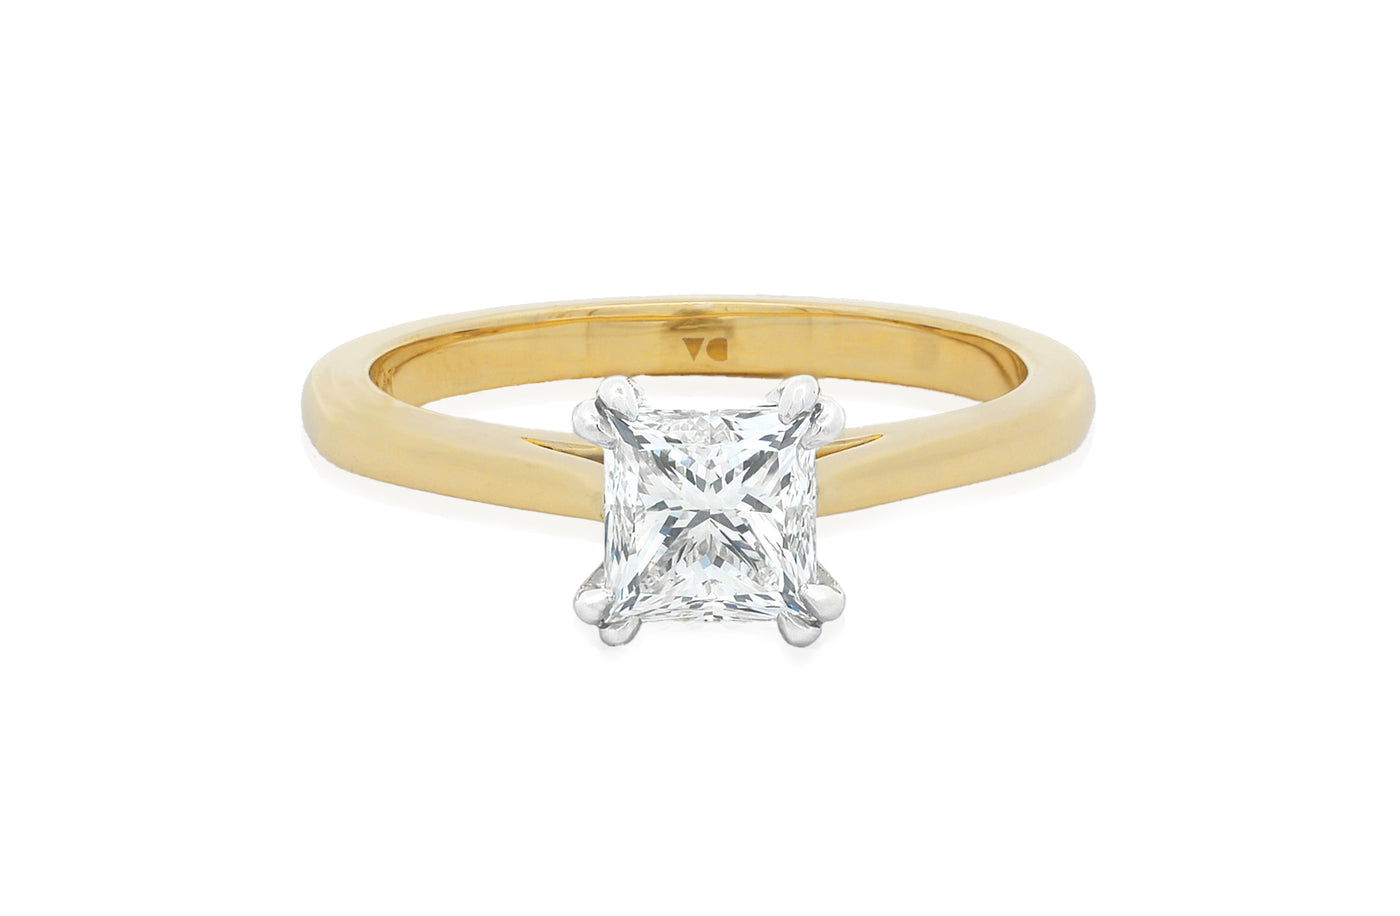 Alice: Princess Cut Diamond Solitaire Ring in 18ct yellow gold